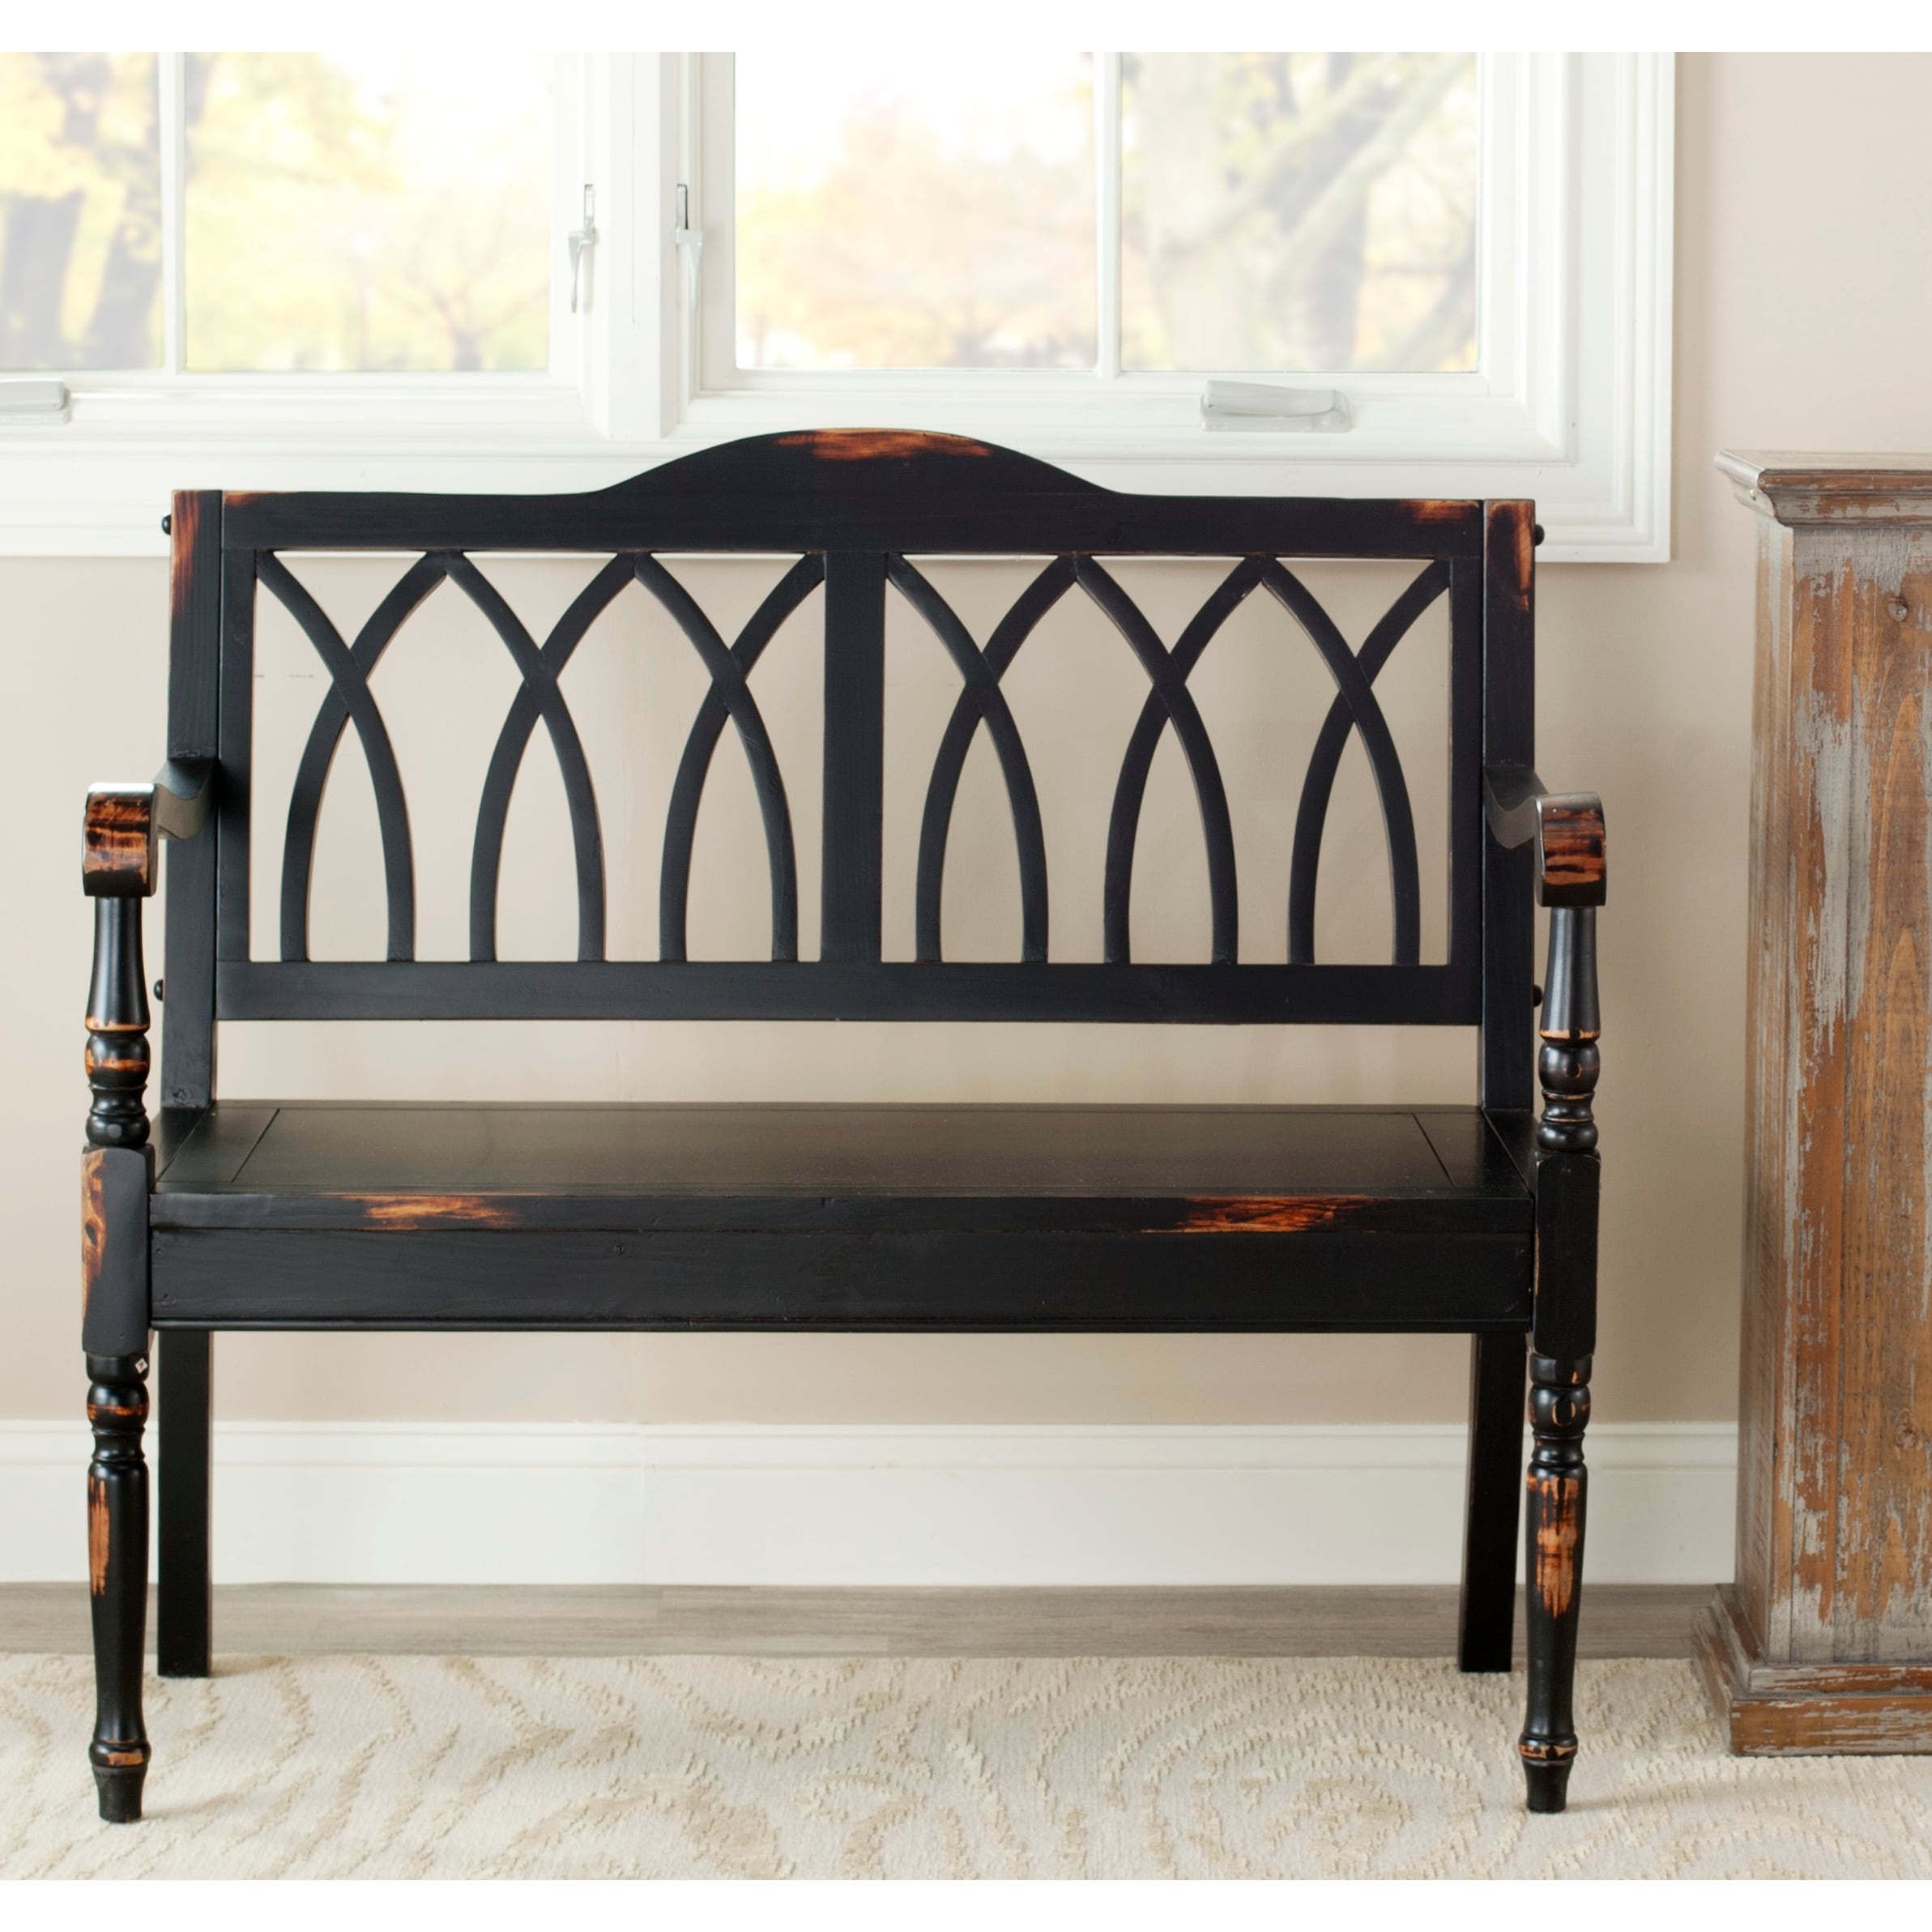 https://ak1.ostkcdn.com/images/products/is/images/direct/445e6f0a5eb0538b71521cc937119e2205528437/SAFAVIEH-Carlise-Distressed-Black-Bench.jpg